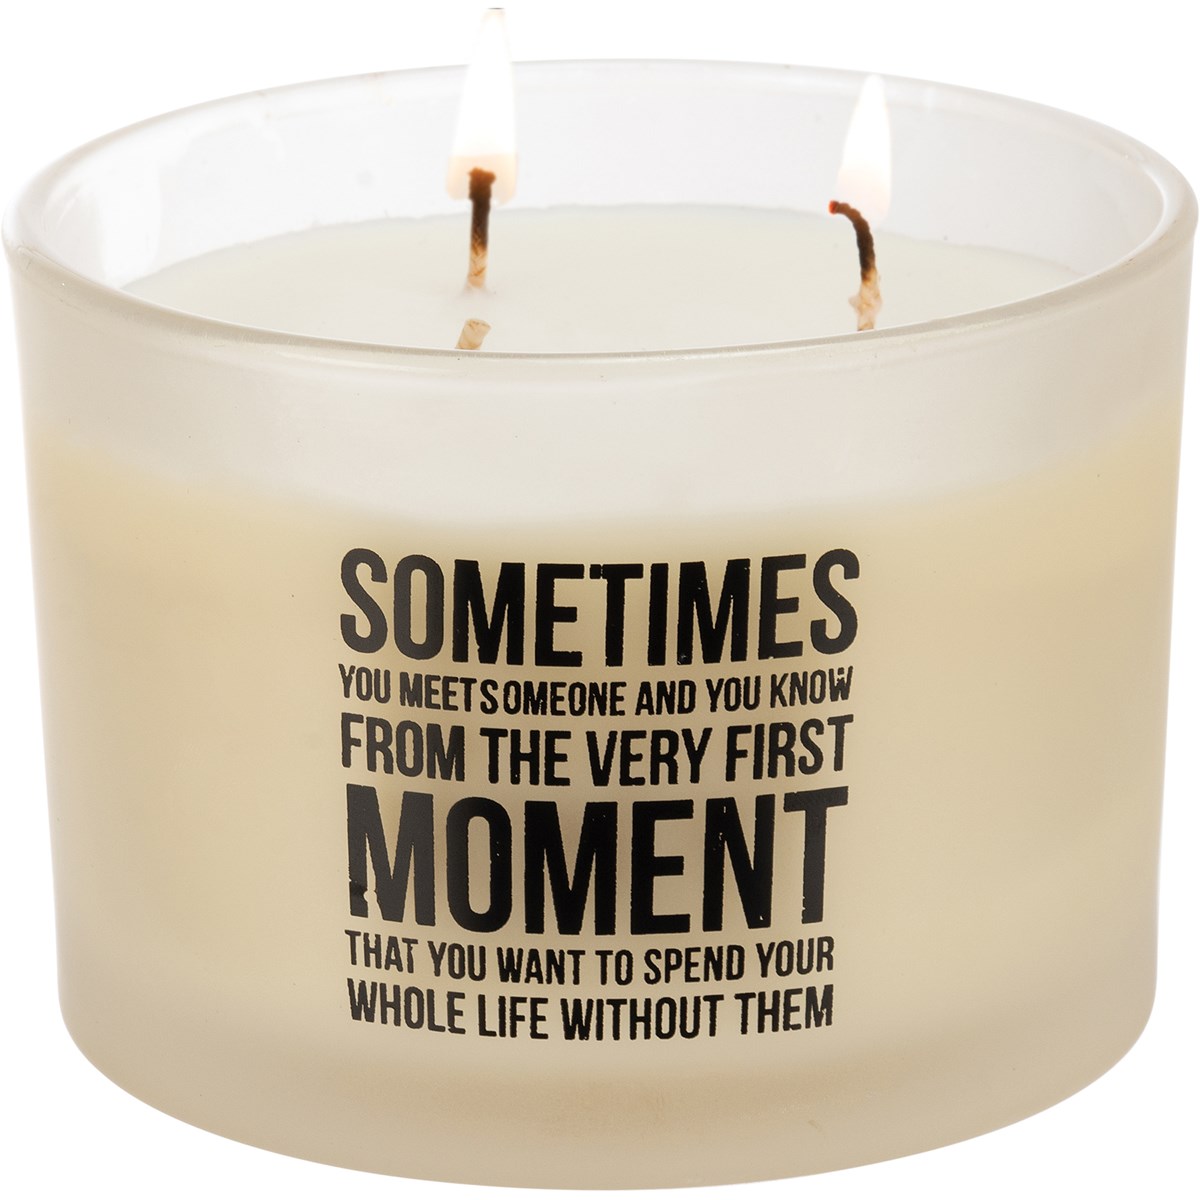 Spend Your Whole Life Without Them Candle - Soy Wax, Glass, Cotton